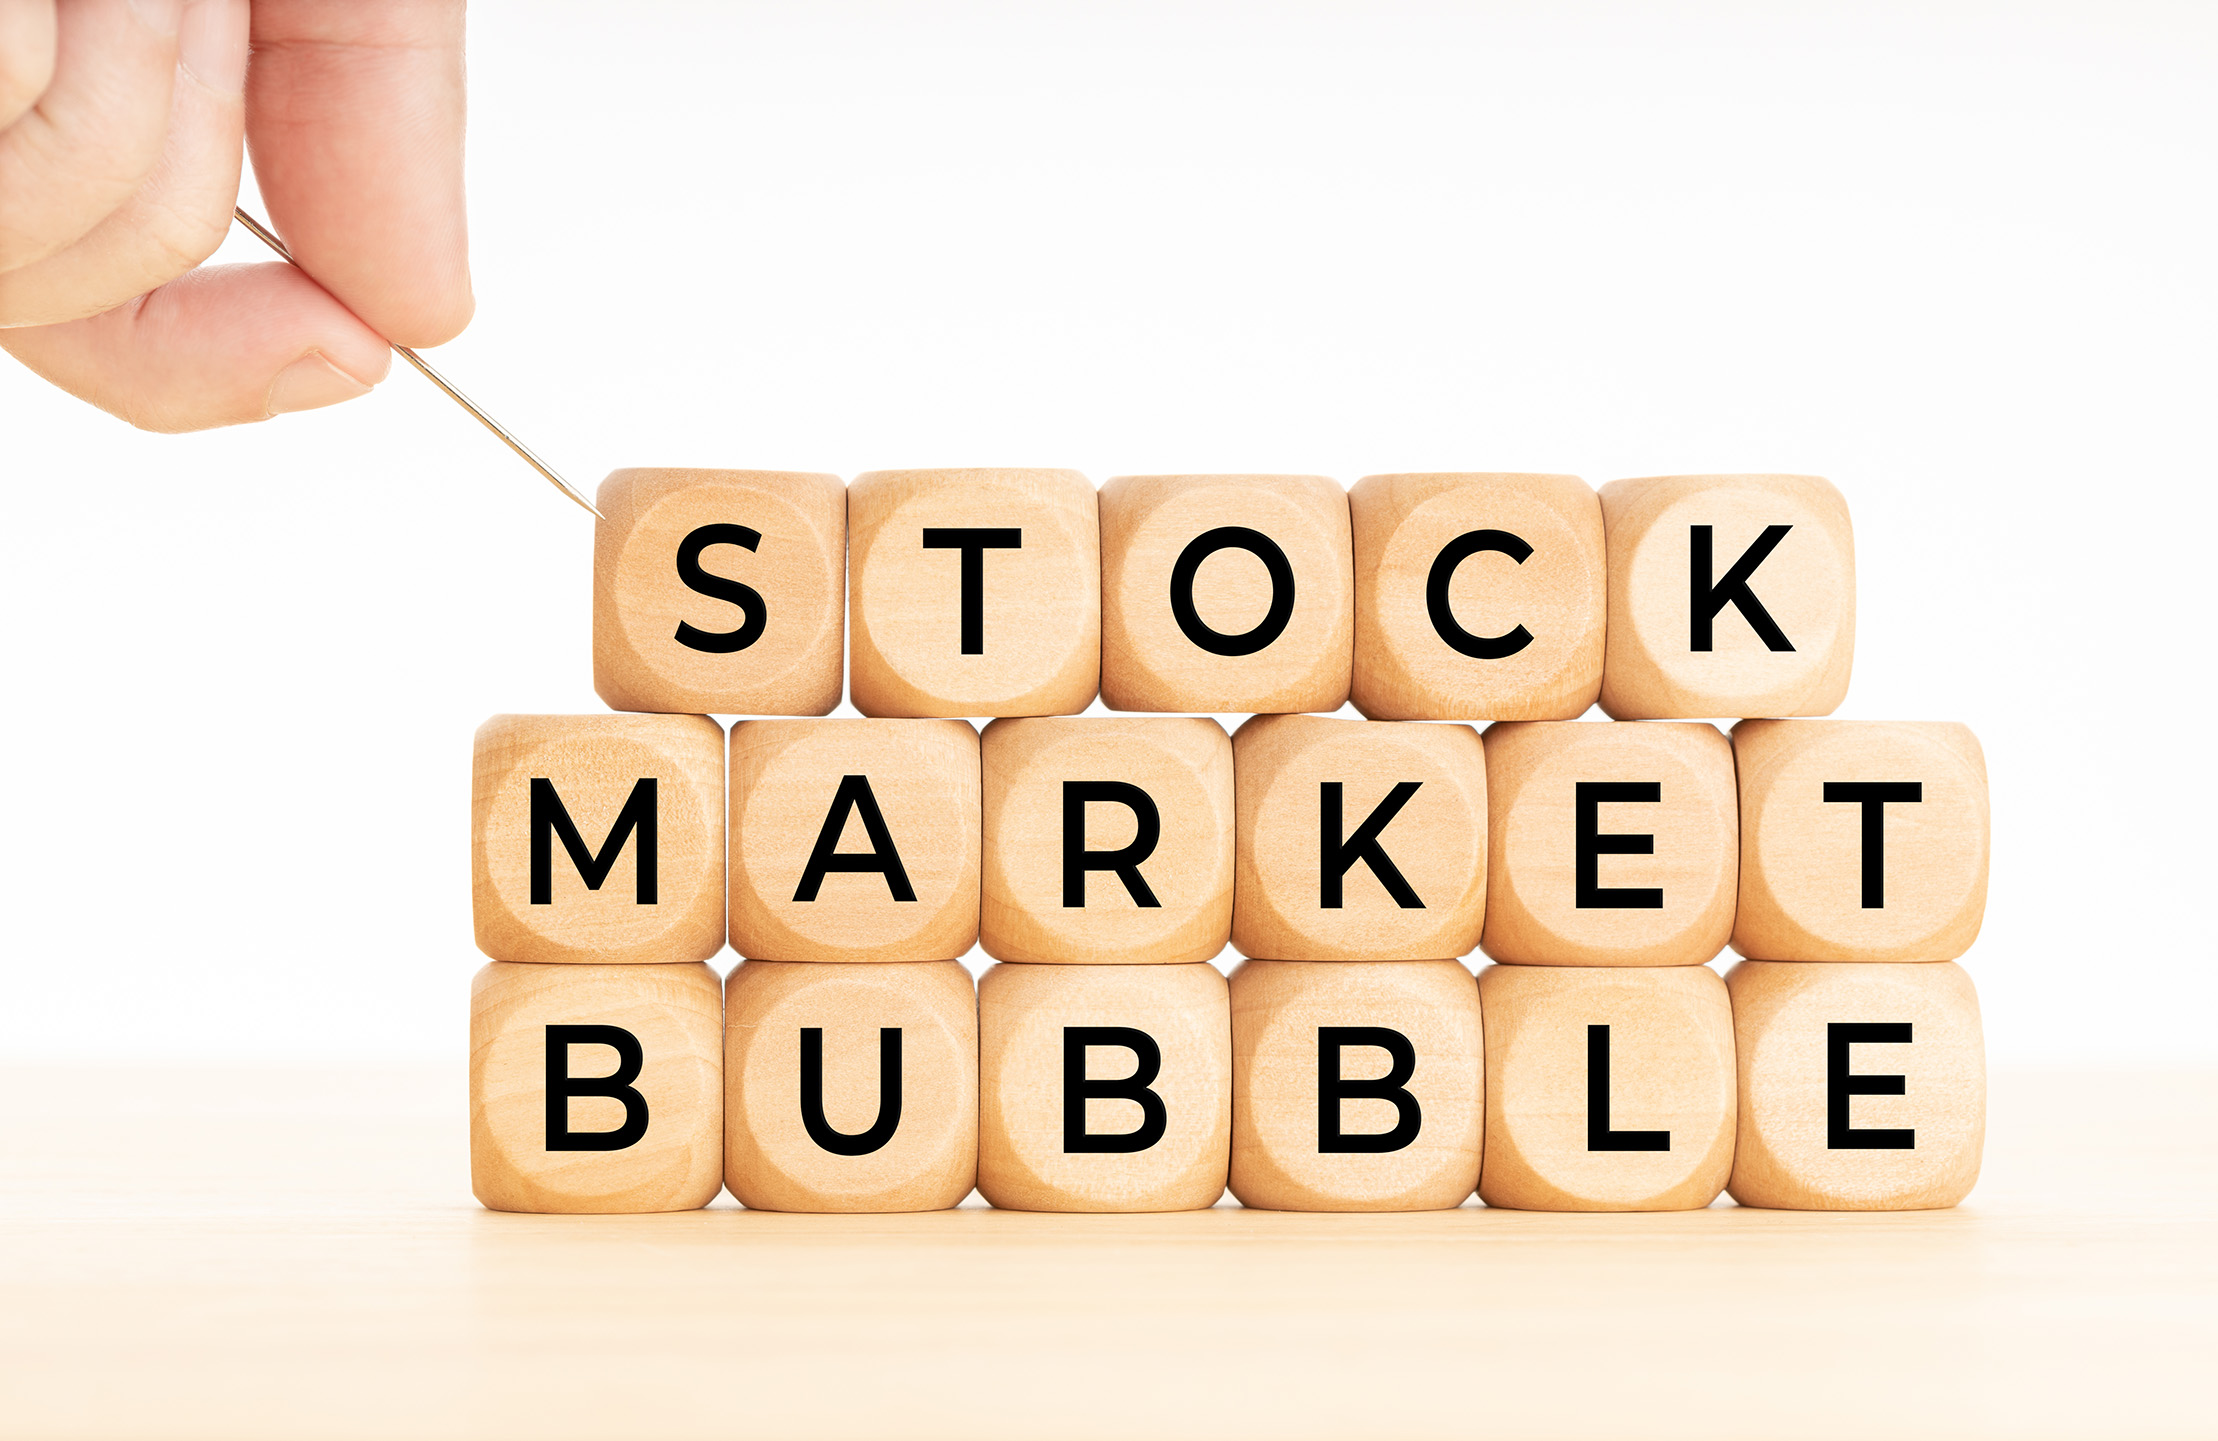 Person Holding a Pin above Stock Market Bubble Text written in Blocks